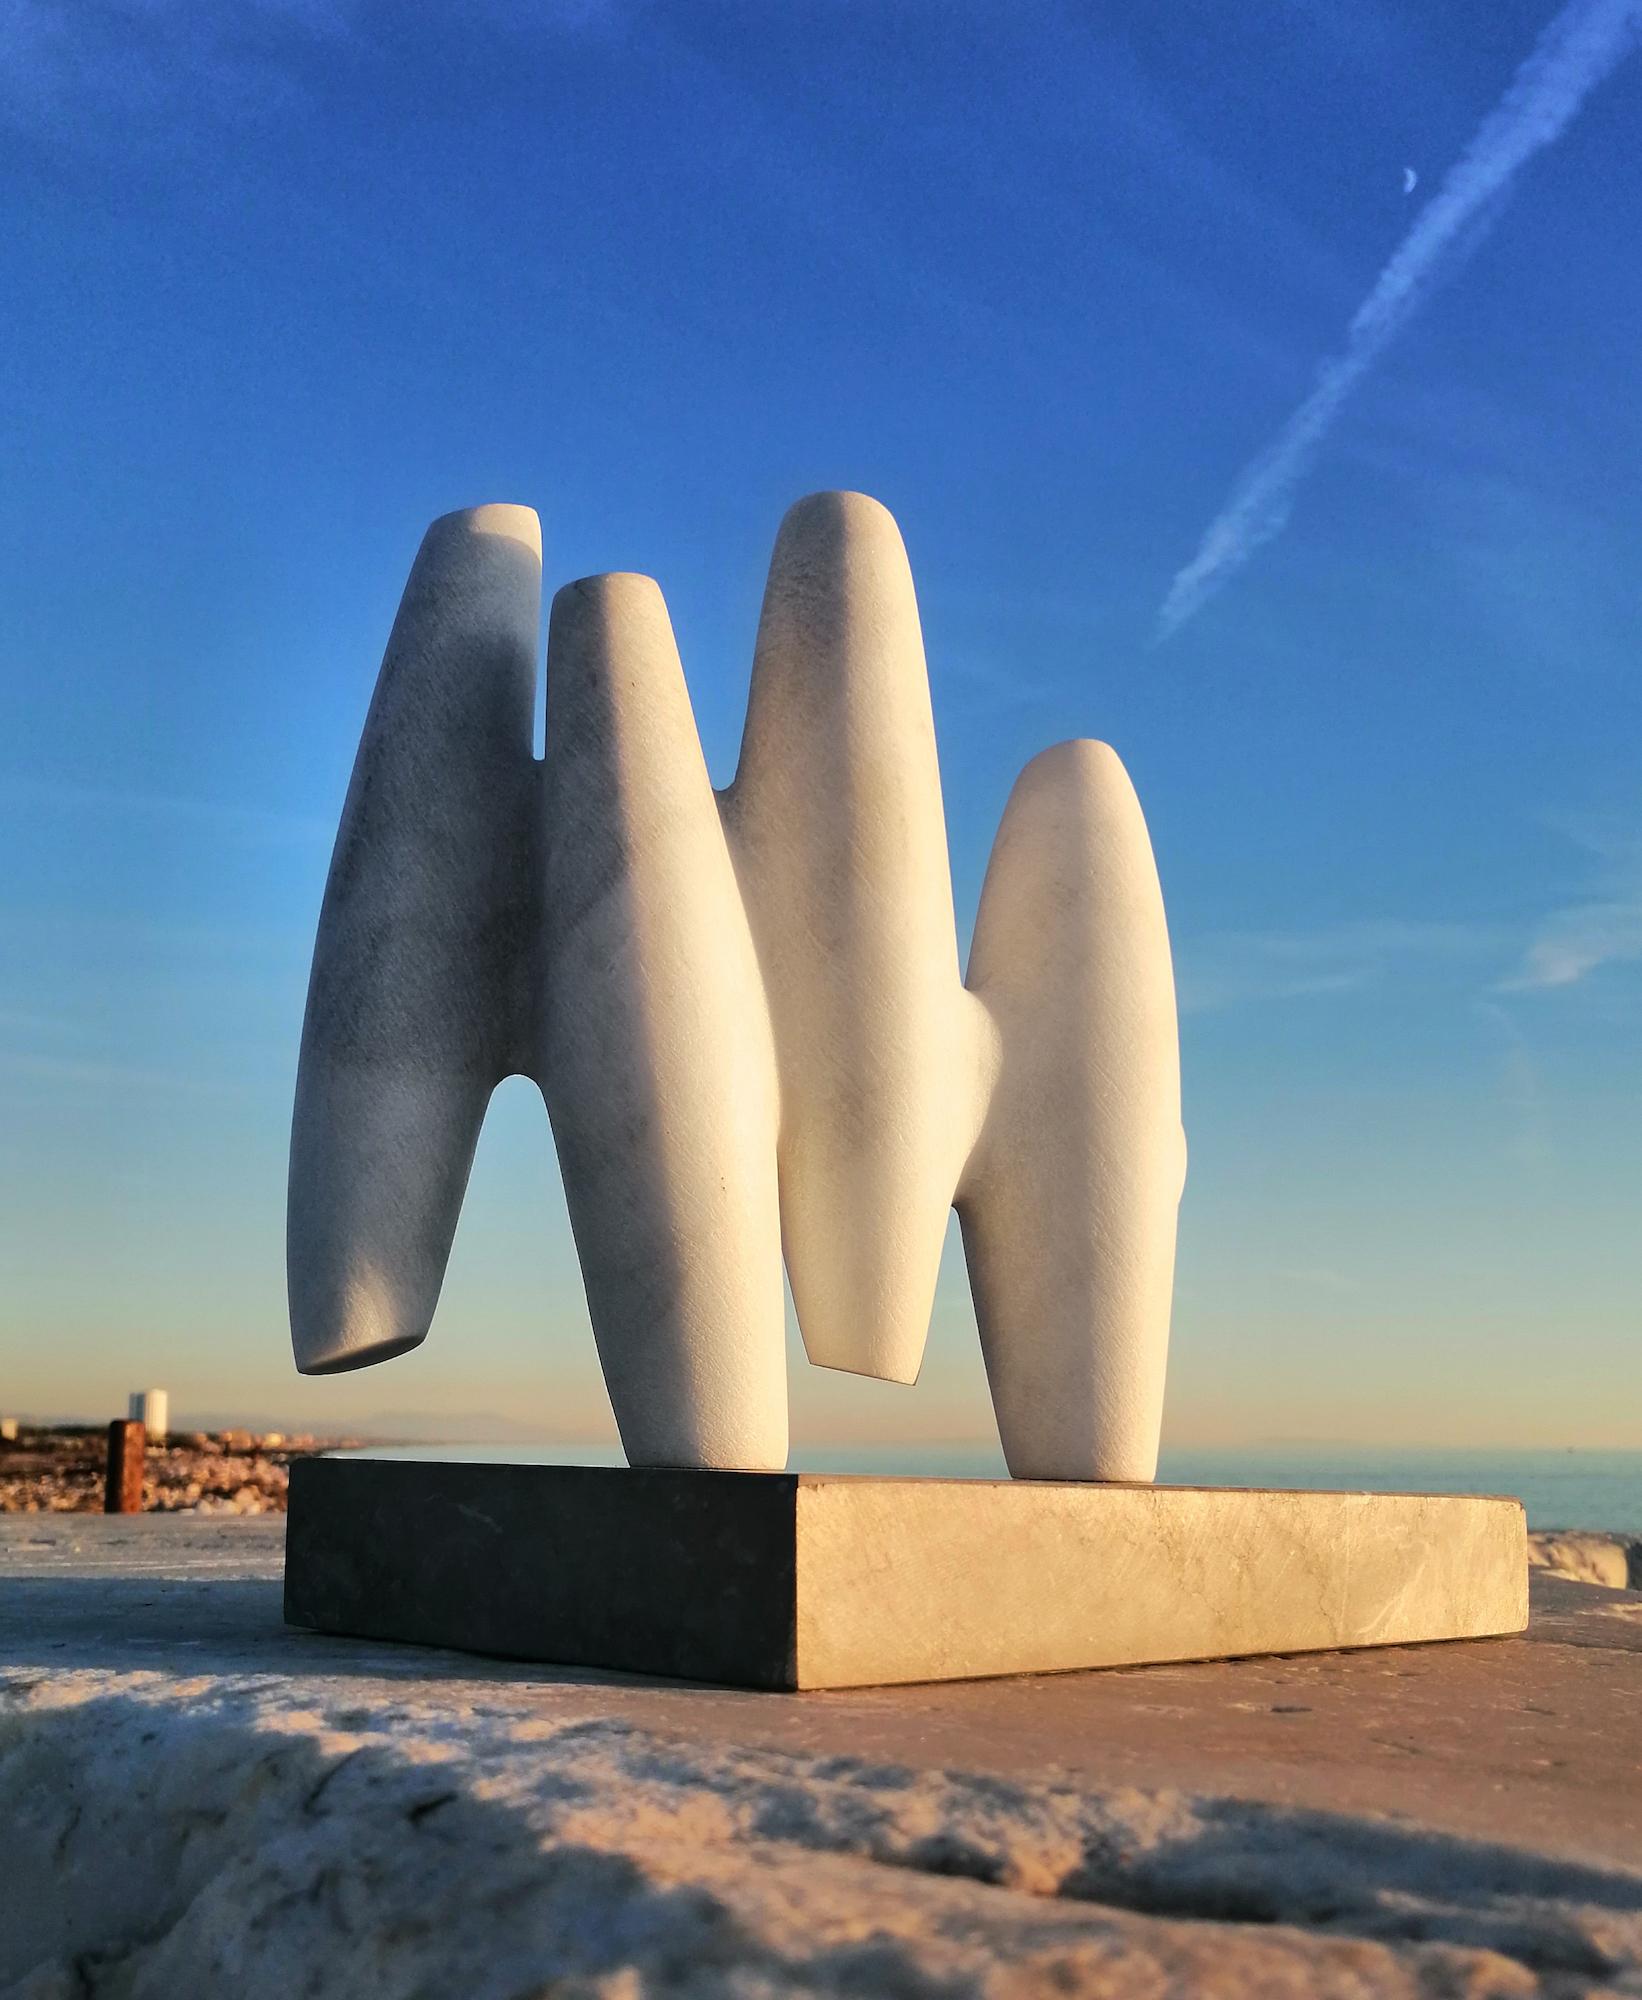 Neighbors is a unique White Carrara marble and Marquinia black marble base sculpture by contemporary artist Francesca Bernardini, dimensions including the movable base are 47 × 50 × 25 cm (18.5 × 19.7 × 9.8 in). 
This sculpture is a unique piece